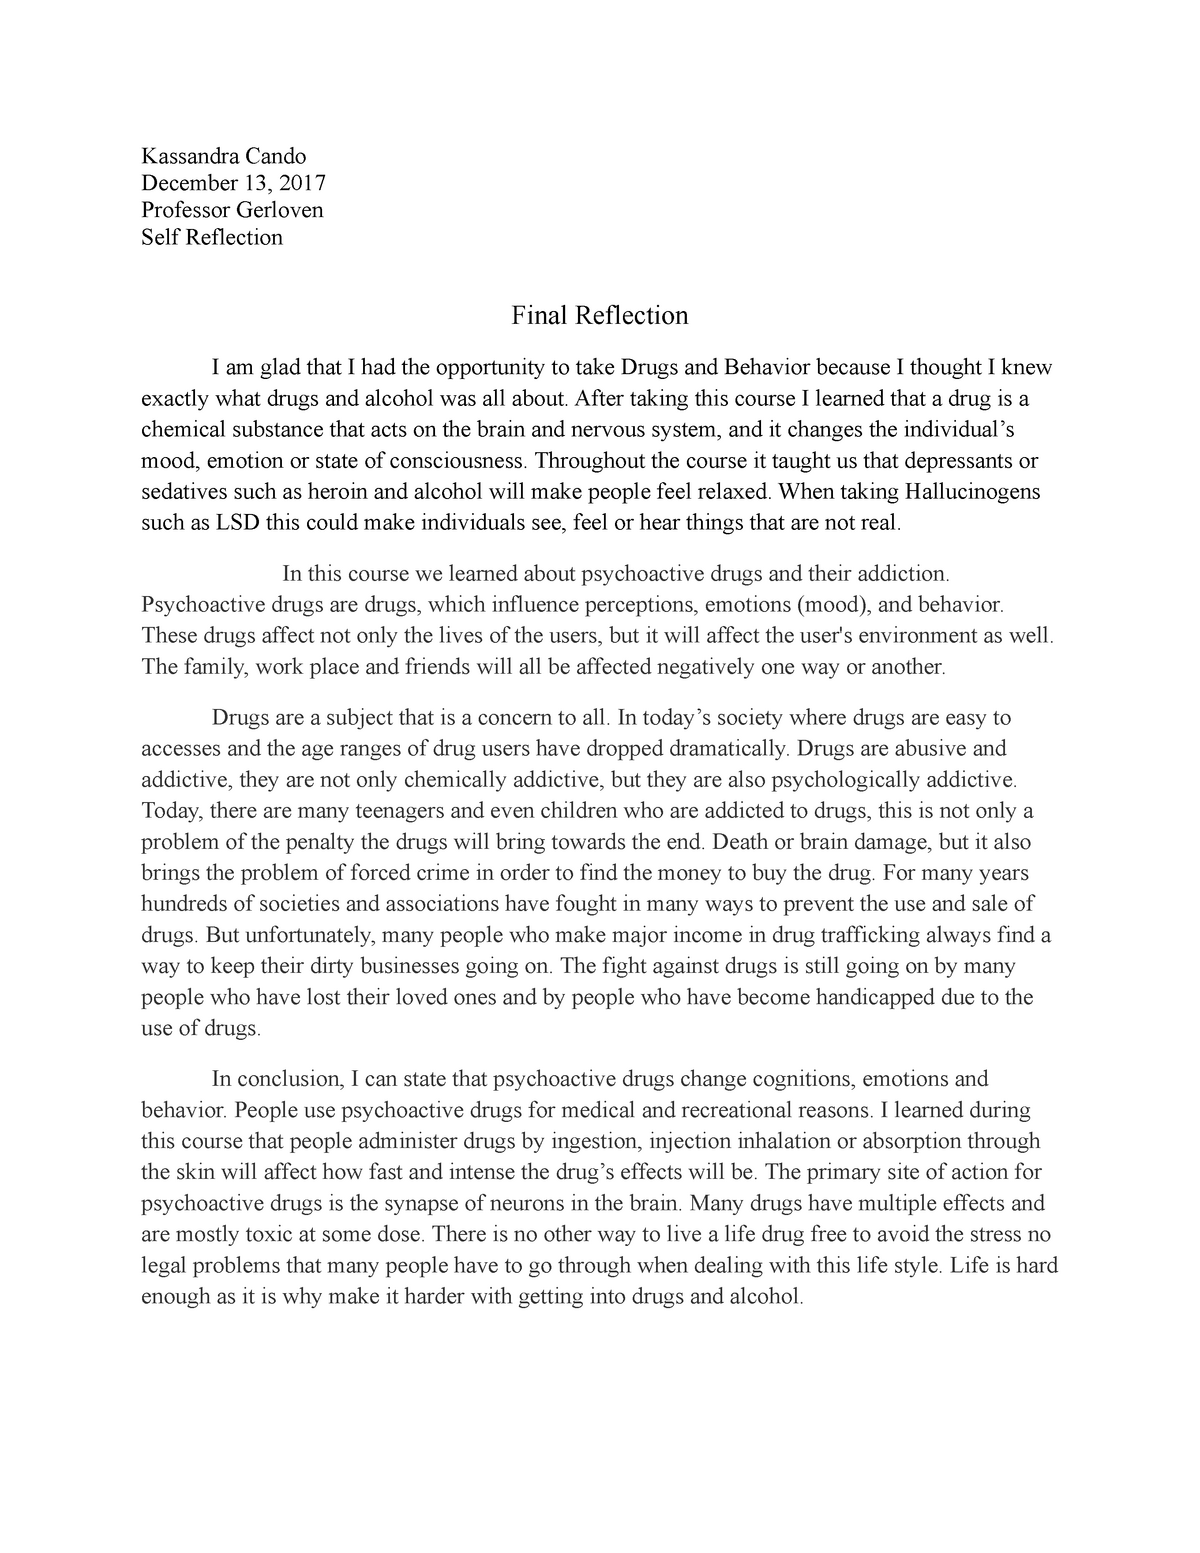 reflection essay about educational journey